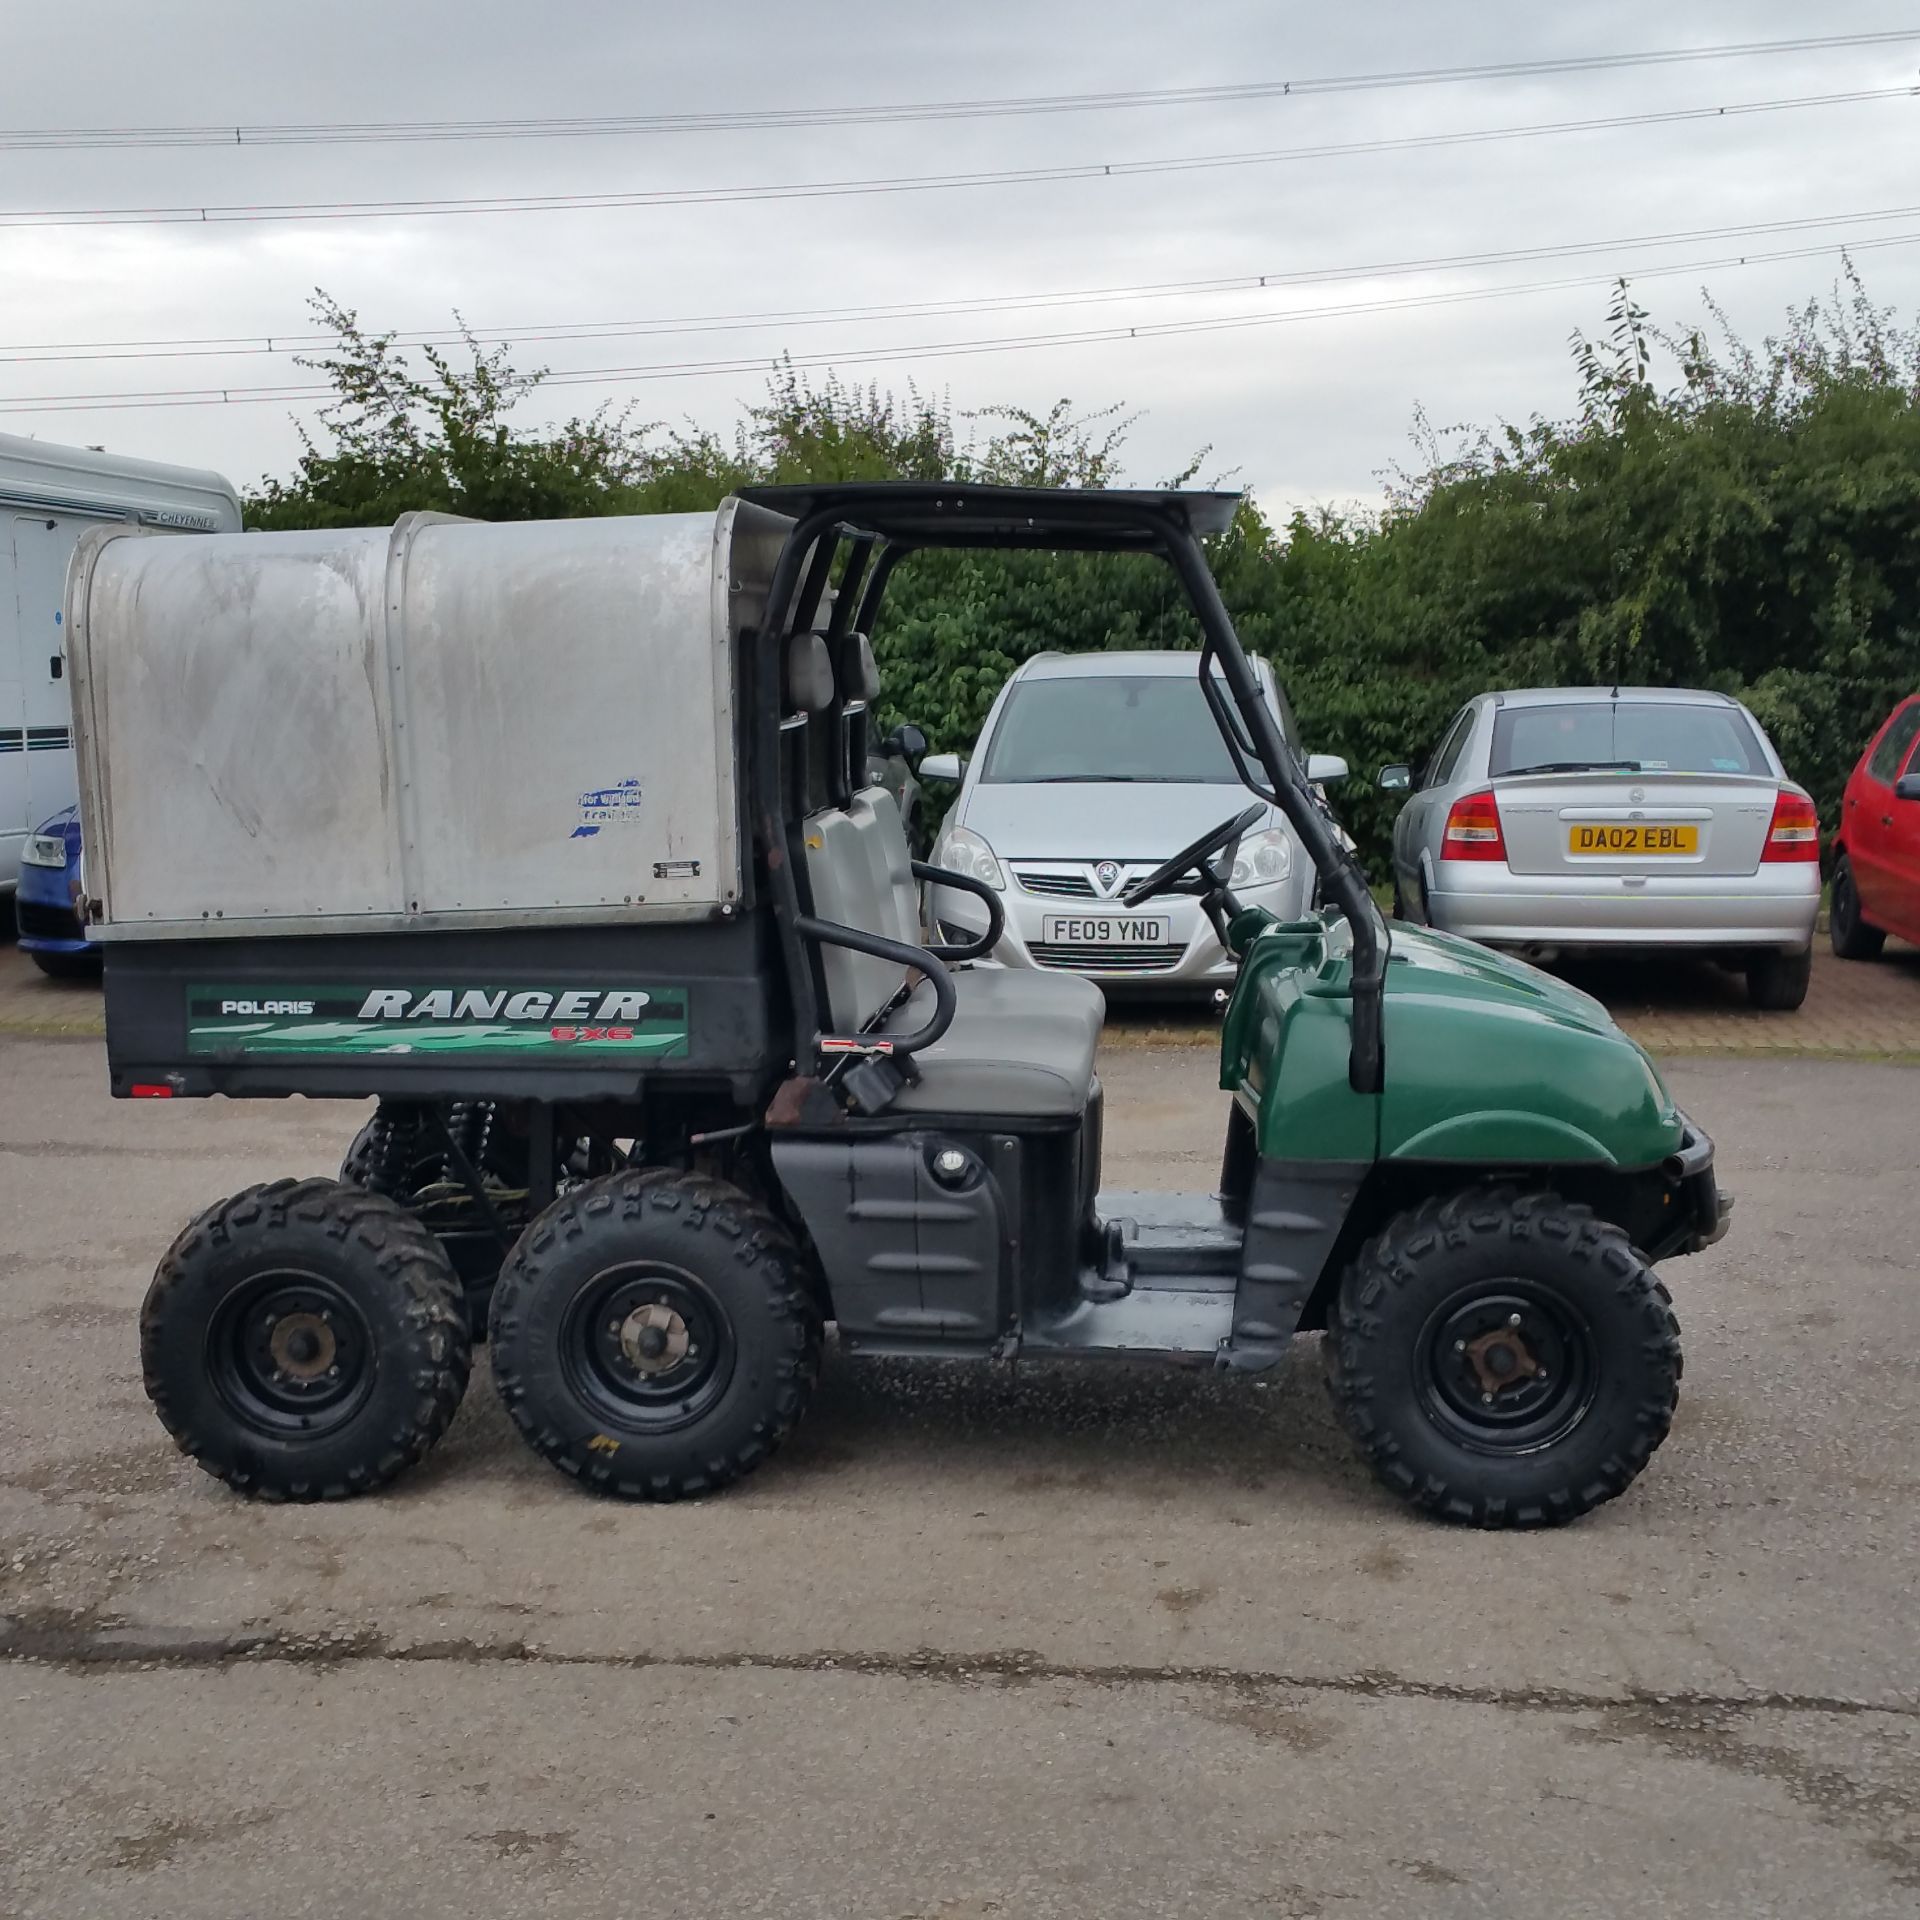 Polaris Ranger 6x6 500cc single cylinder petrol Hours 932 Year of manufacture 2004 4 or 6 wheel - Image 2 of 7